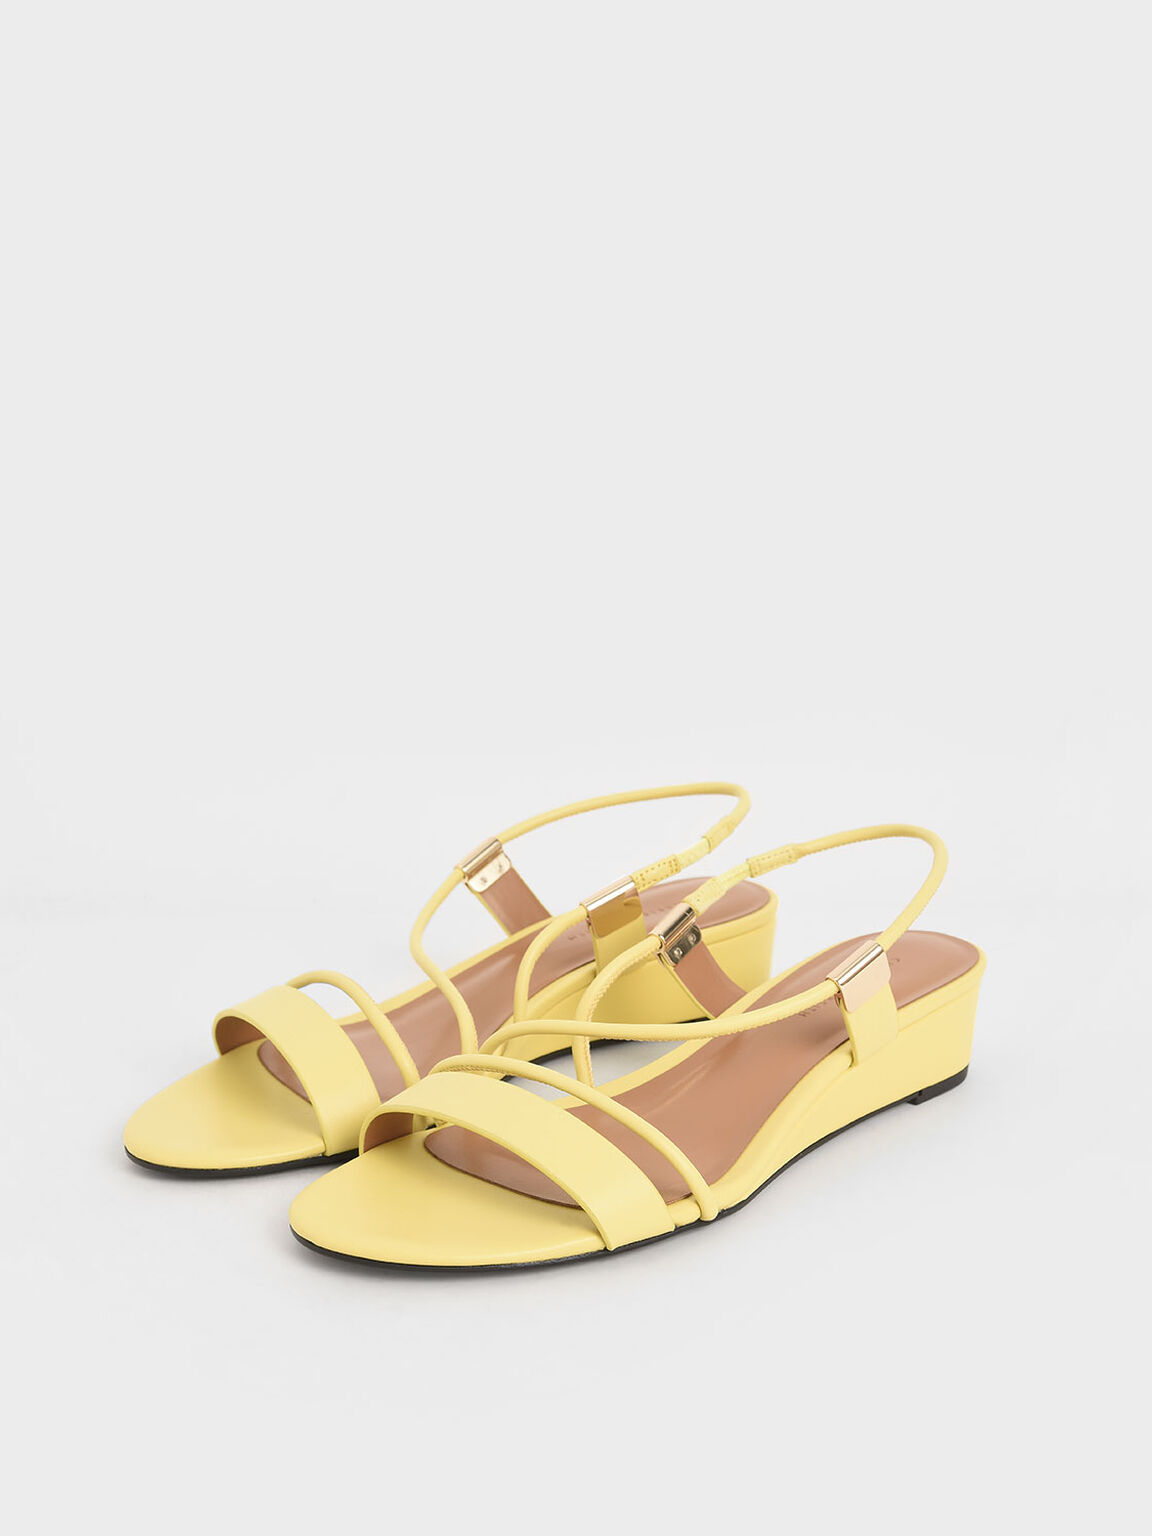 Strappy Slingback Wedges, Yellow, hi-res